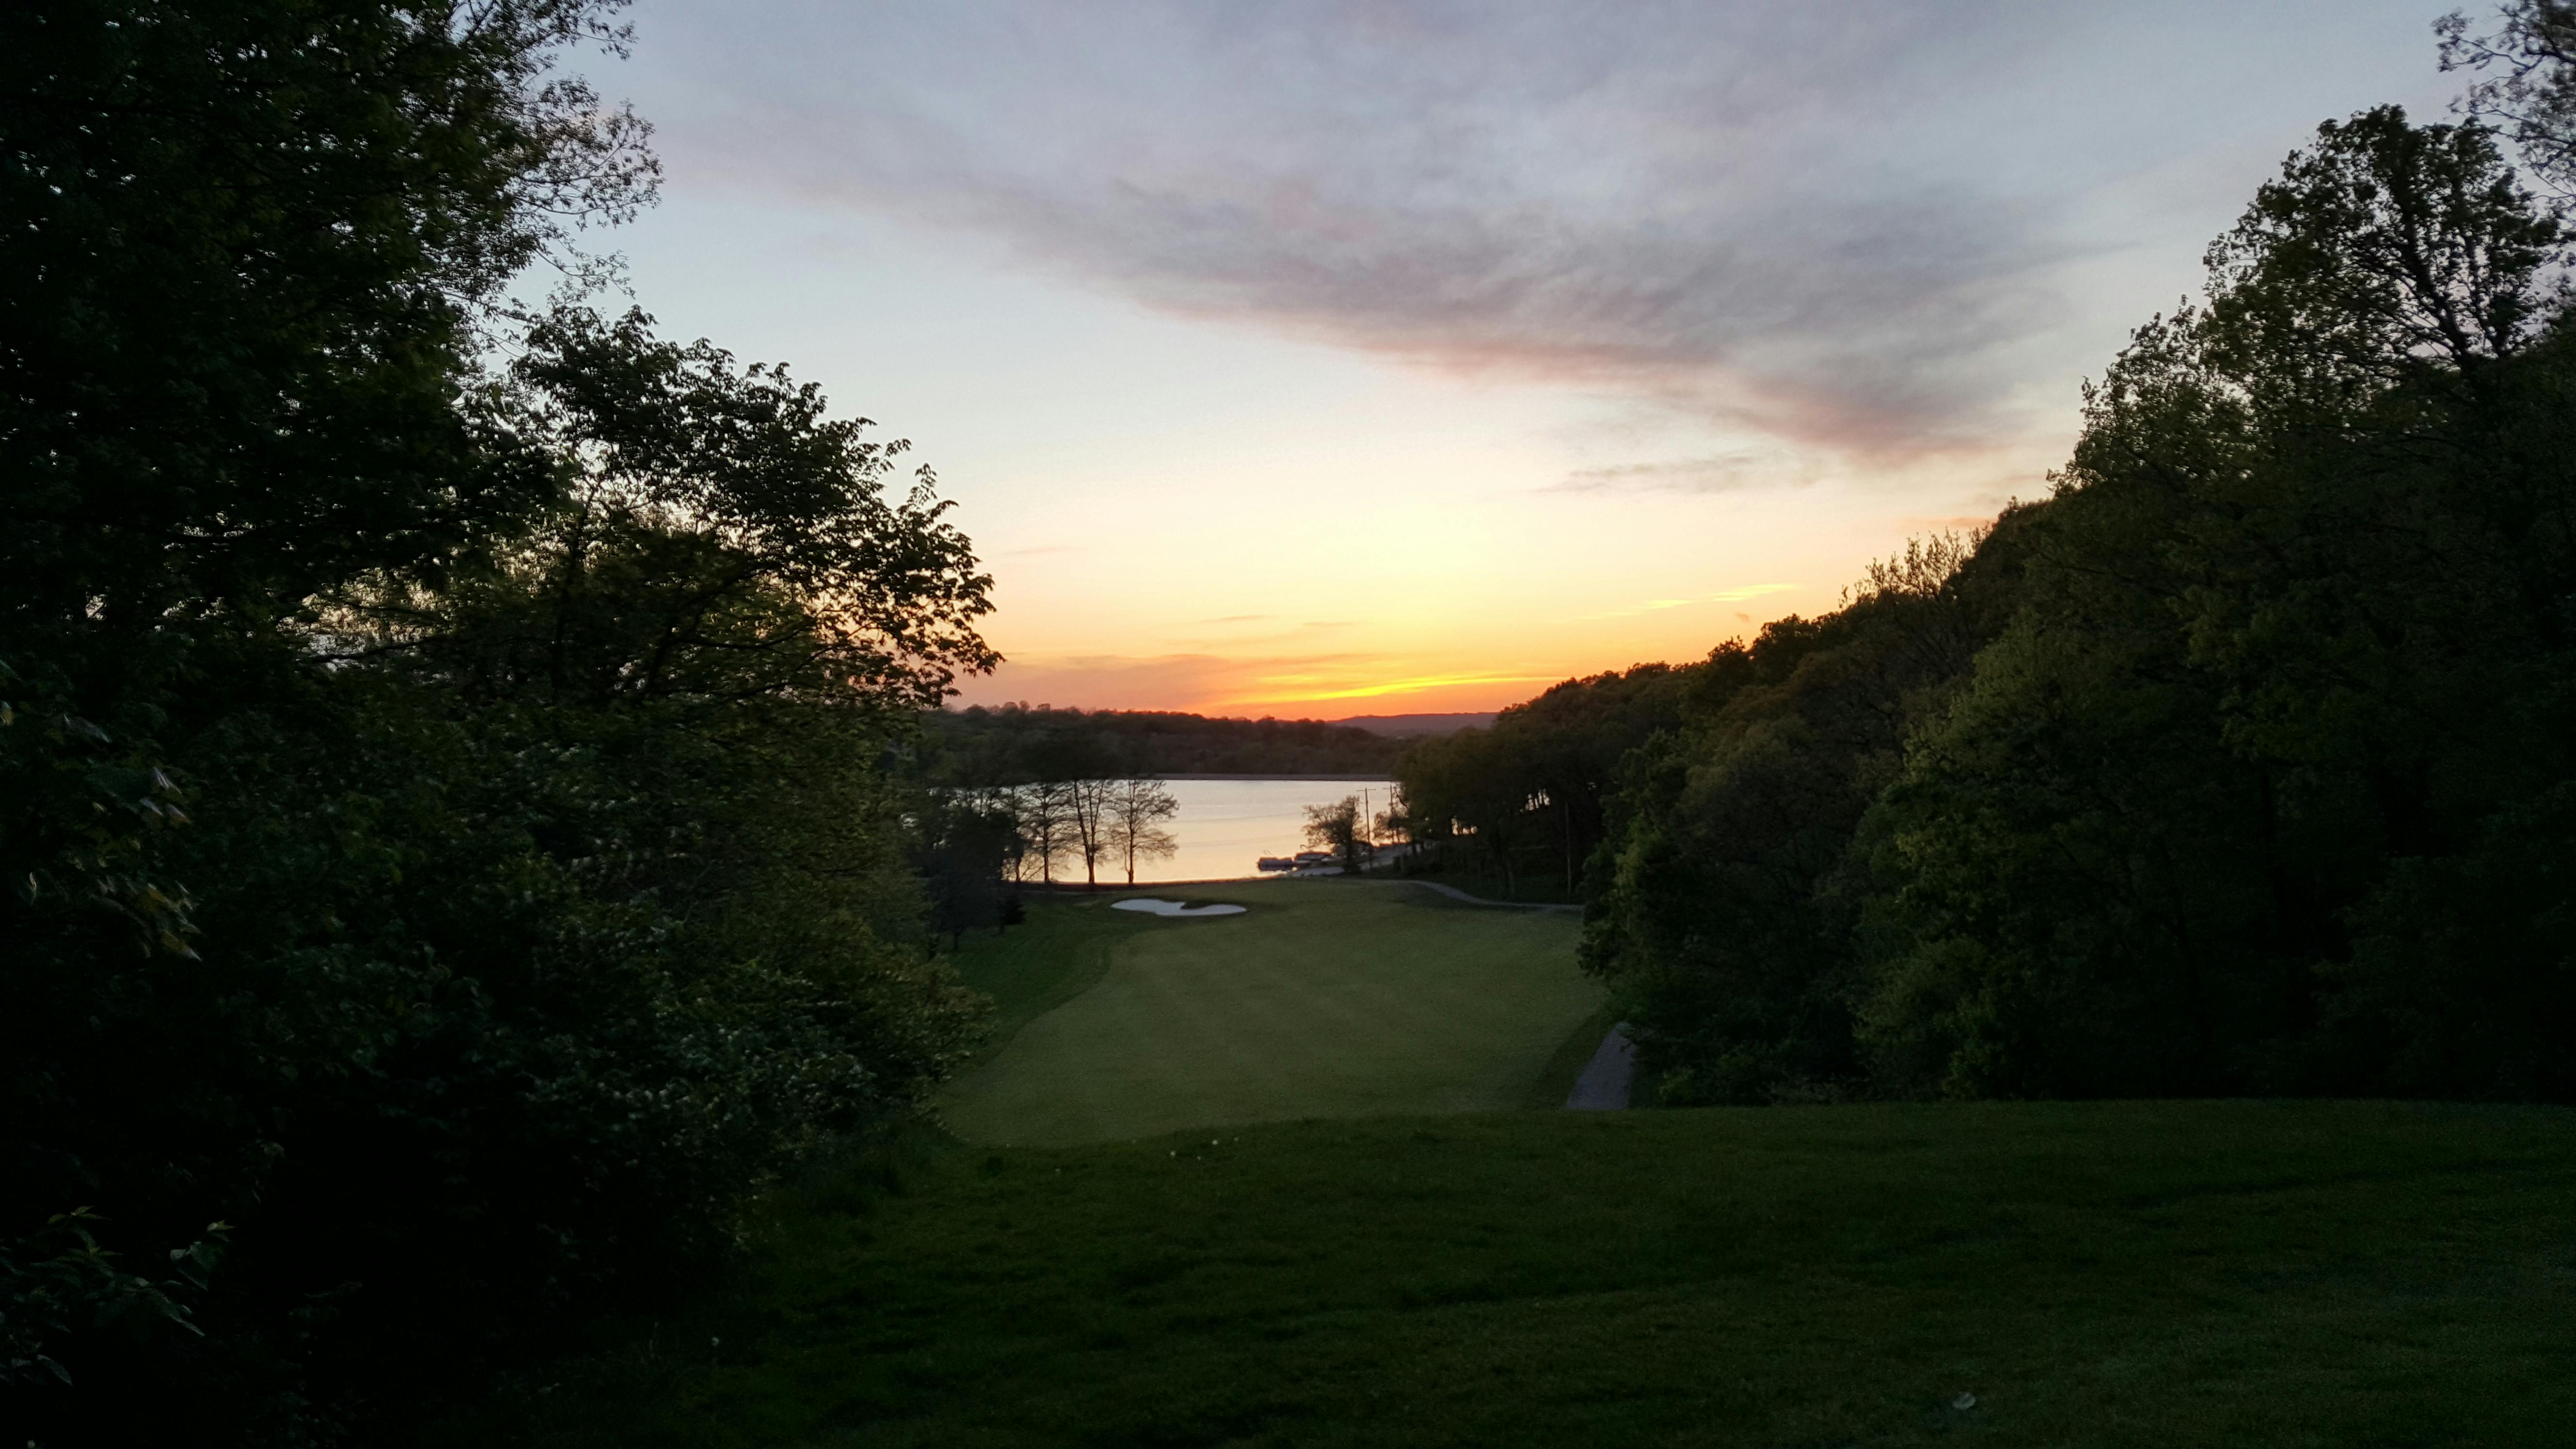 Free stock photo of Sunset from 12th hole Tee-Box